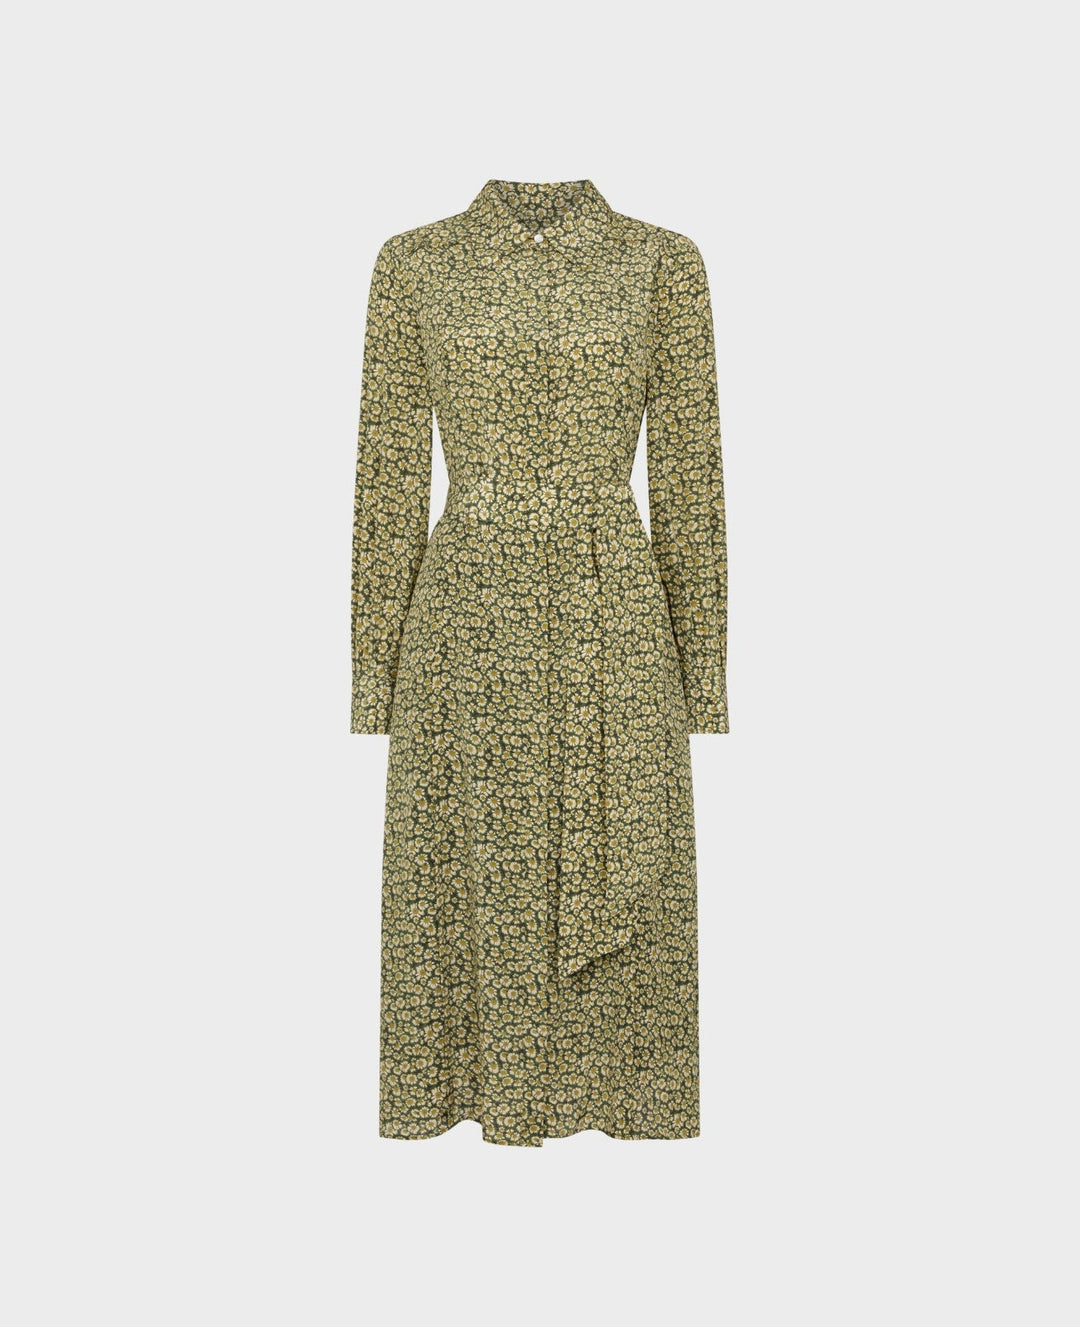 Elevate your style and spirit with this beautiful Liberty print midi dress. Crafted from luxurious 100% silk crepe de chine, this pintuck shirt dress is feminine and flattering, making it perfect for seamless and chic day-to-night wear.